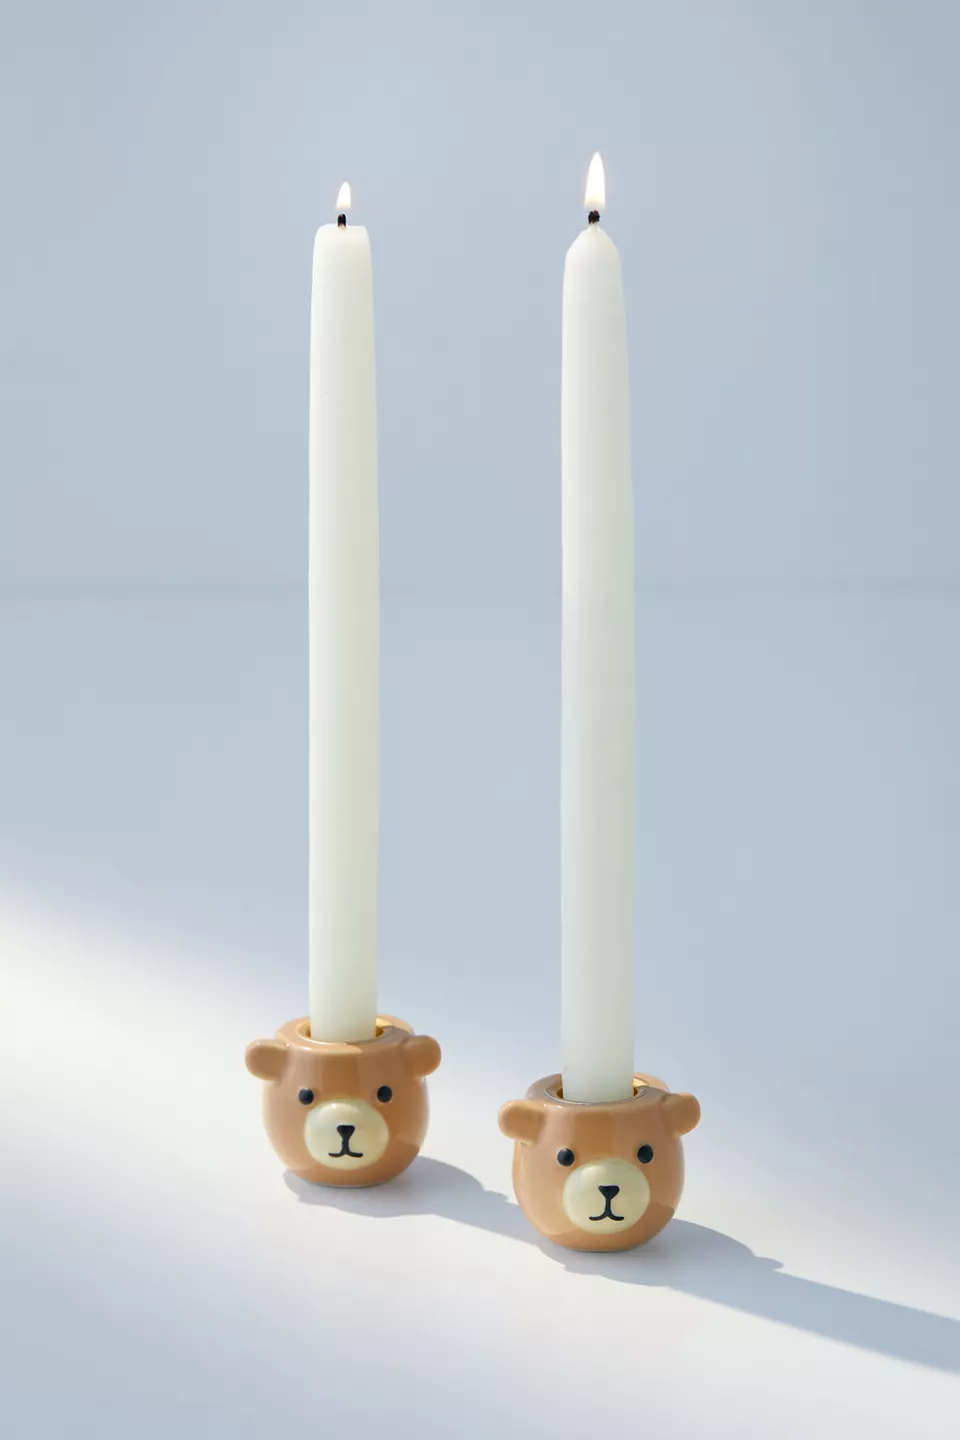 Two novelty bear-shaped candle holders with lit taper candles, ideal for unique home decor